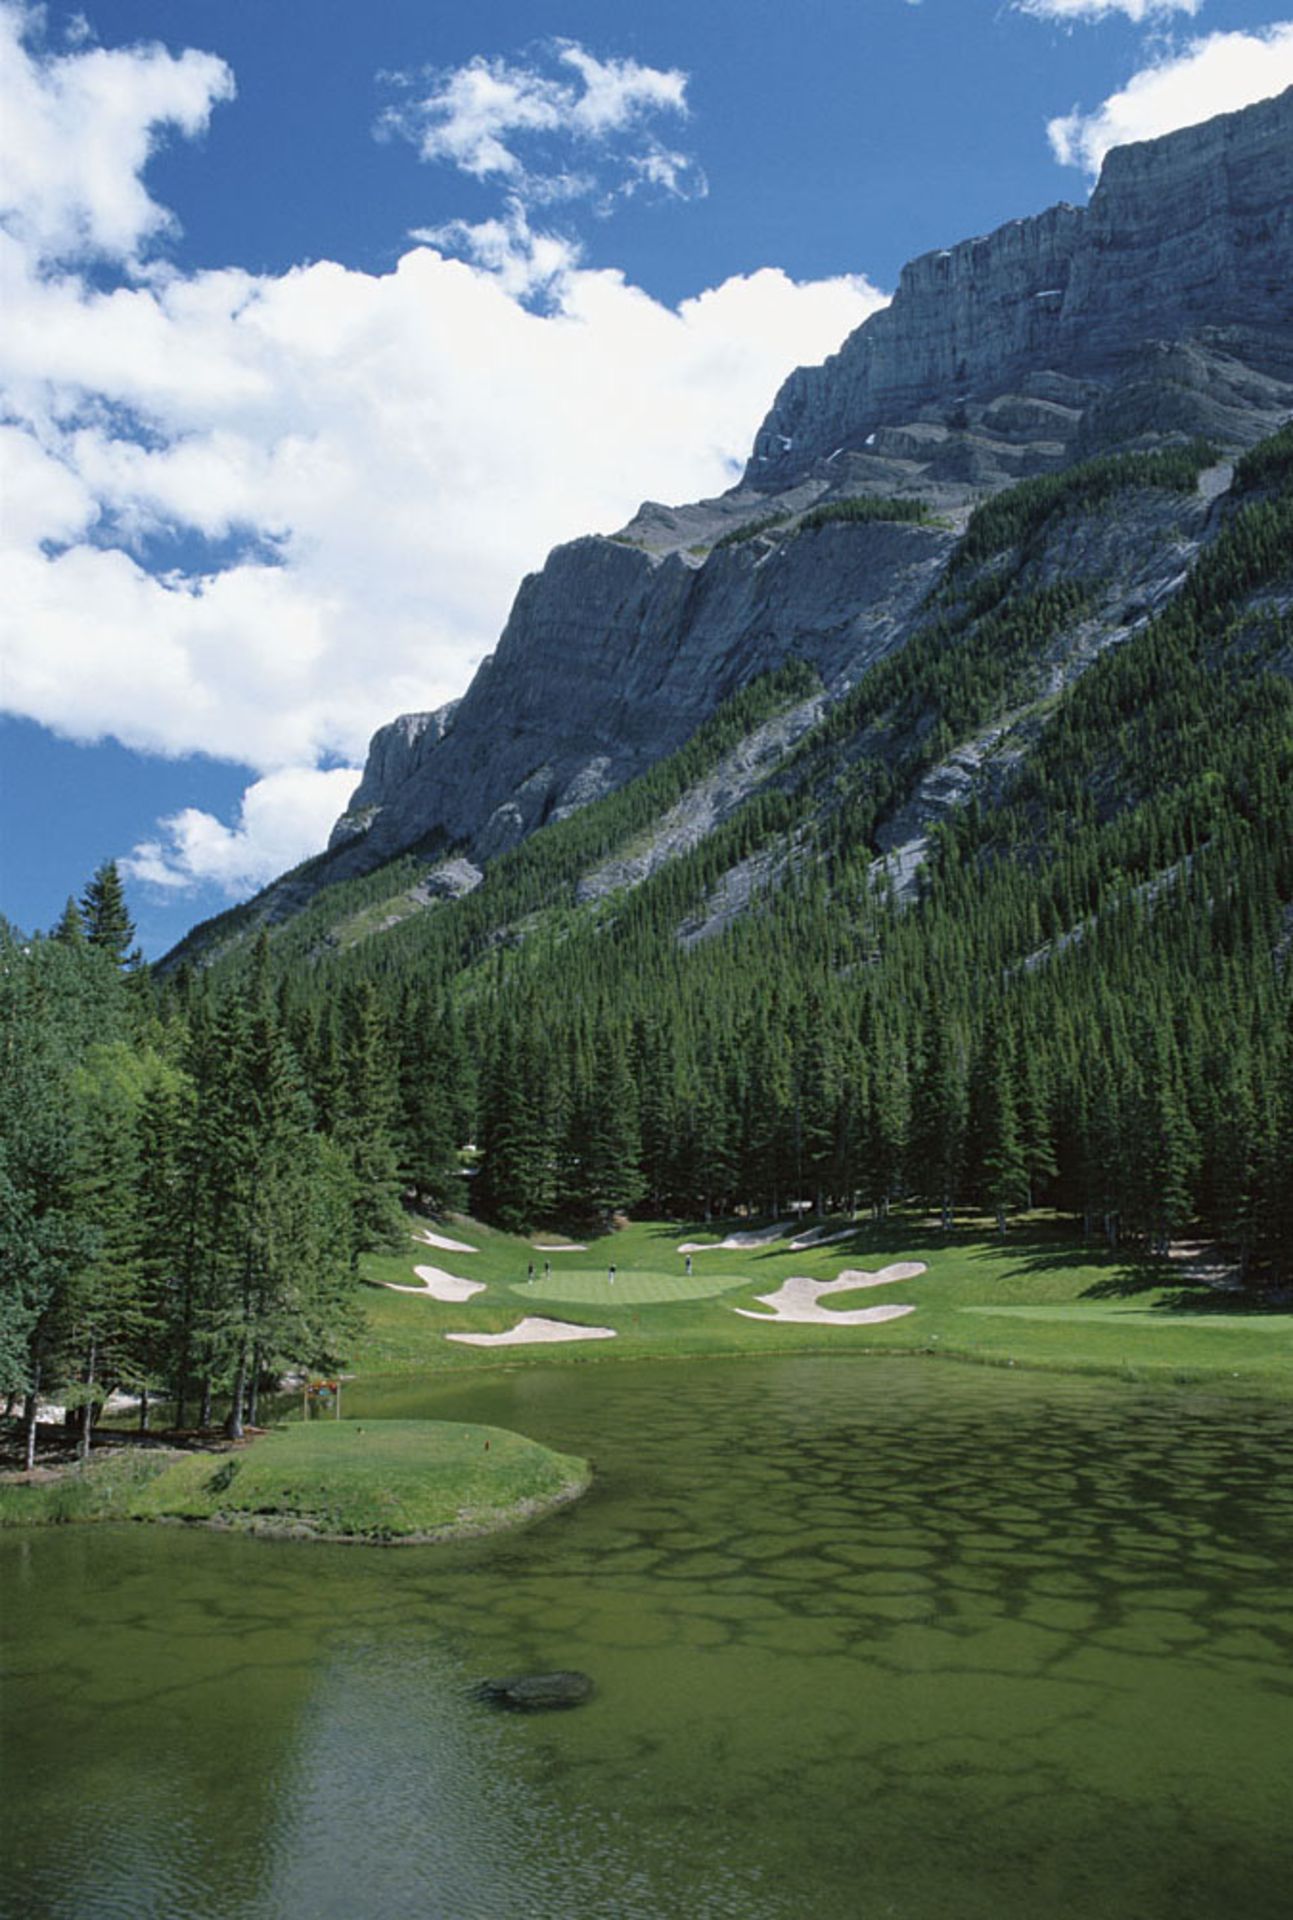 Foursome Golf at Fairmont Banff Springs Golf Course - Image 2 of 2